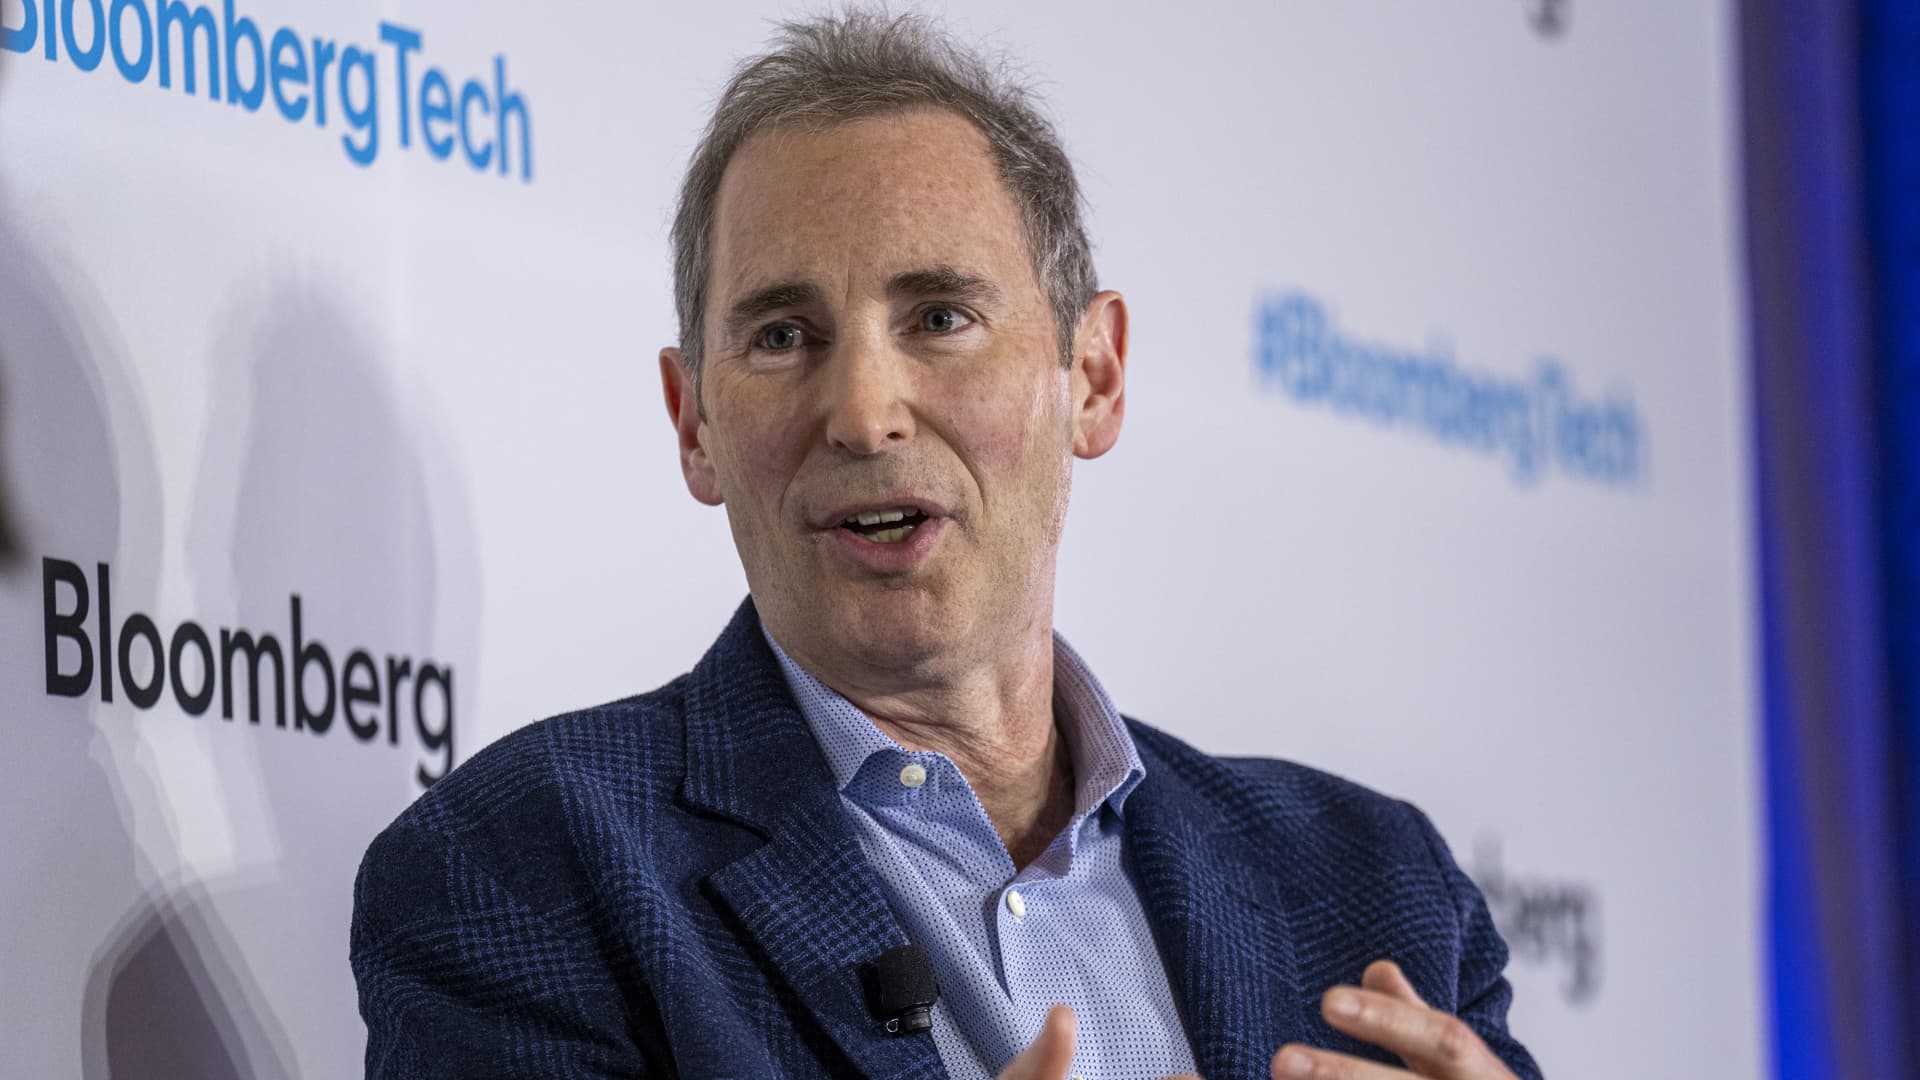 Amazon CEO Andy Jassy says in shareholder letter he's confident he can get costs under control